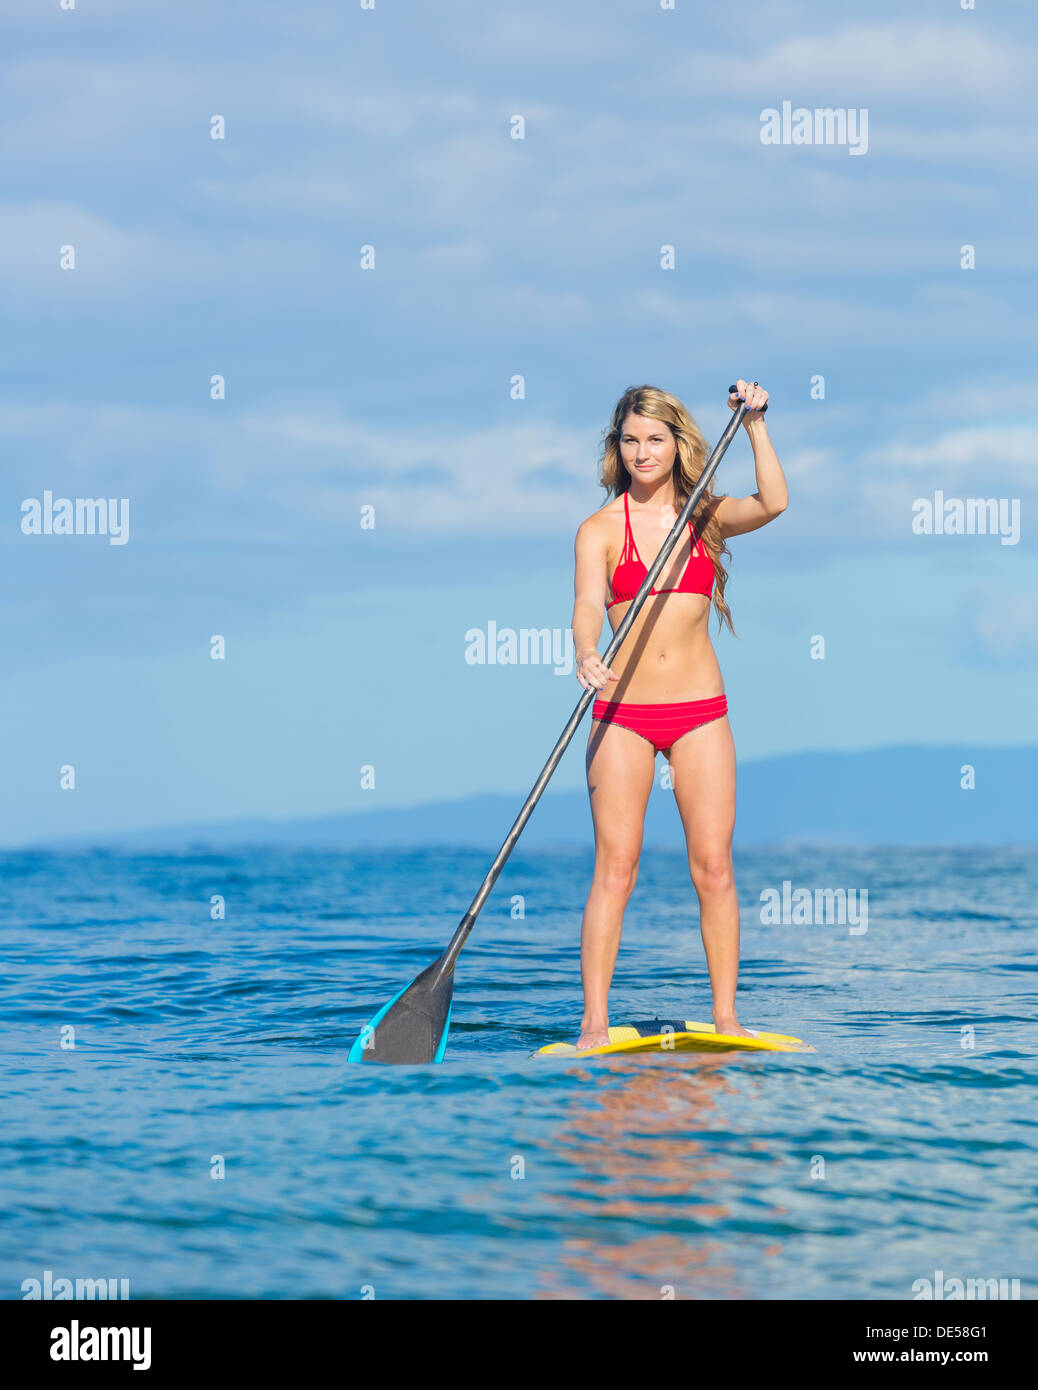 Young Attractive Woman on Stand Up Paddle Board, SUP, in the Blue Waters off Hawaii, Active Life Concept Stock Photo